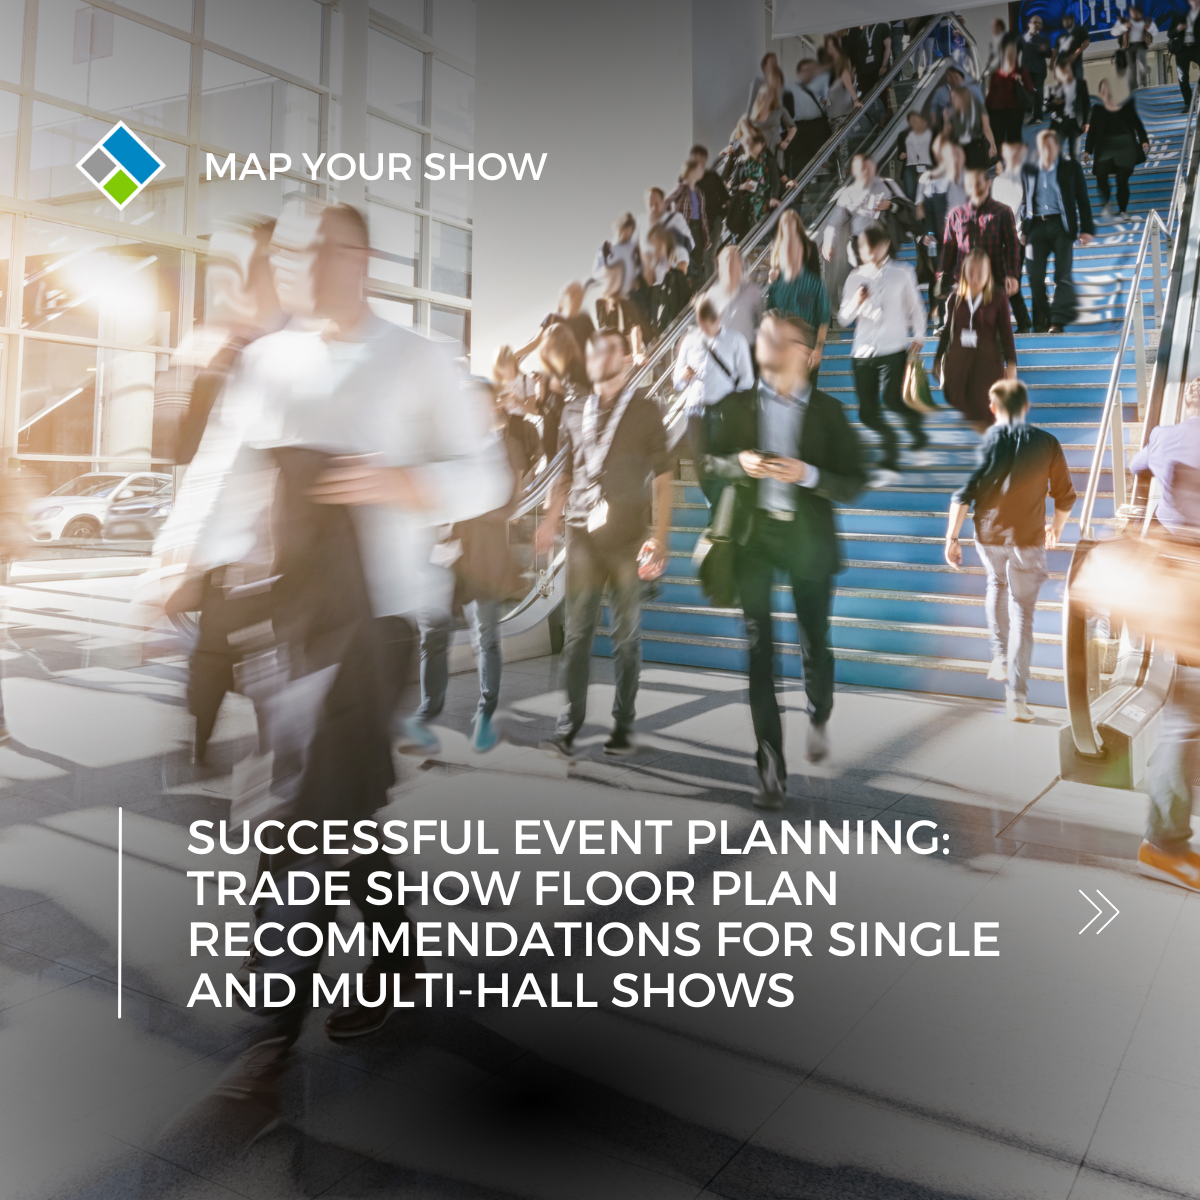 Successful Event Planning: Trade Show Floor Plan Recommendations for Single and Multi-Hall Shows. Map Your Show, Event Management Technology. Event Planning Software.